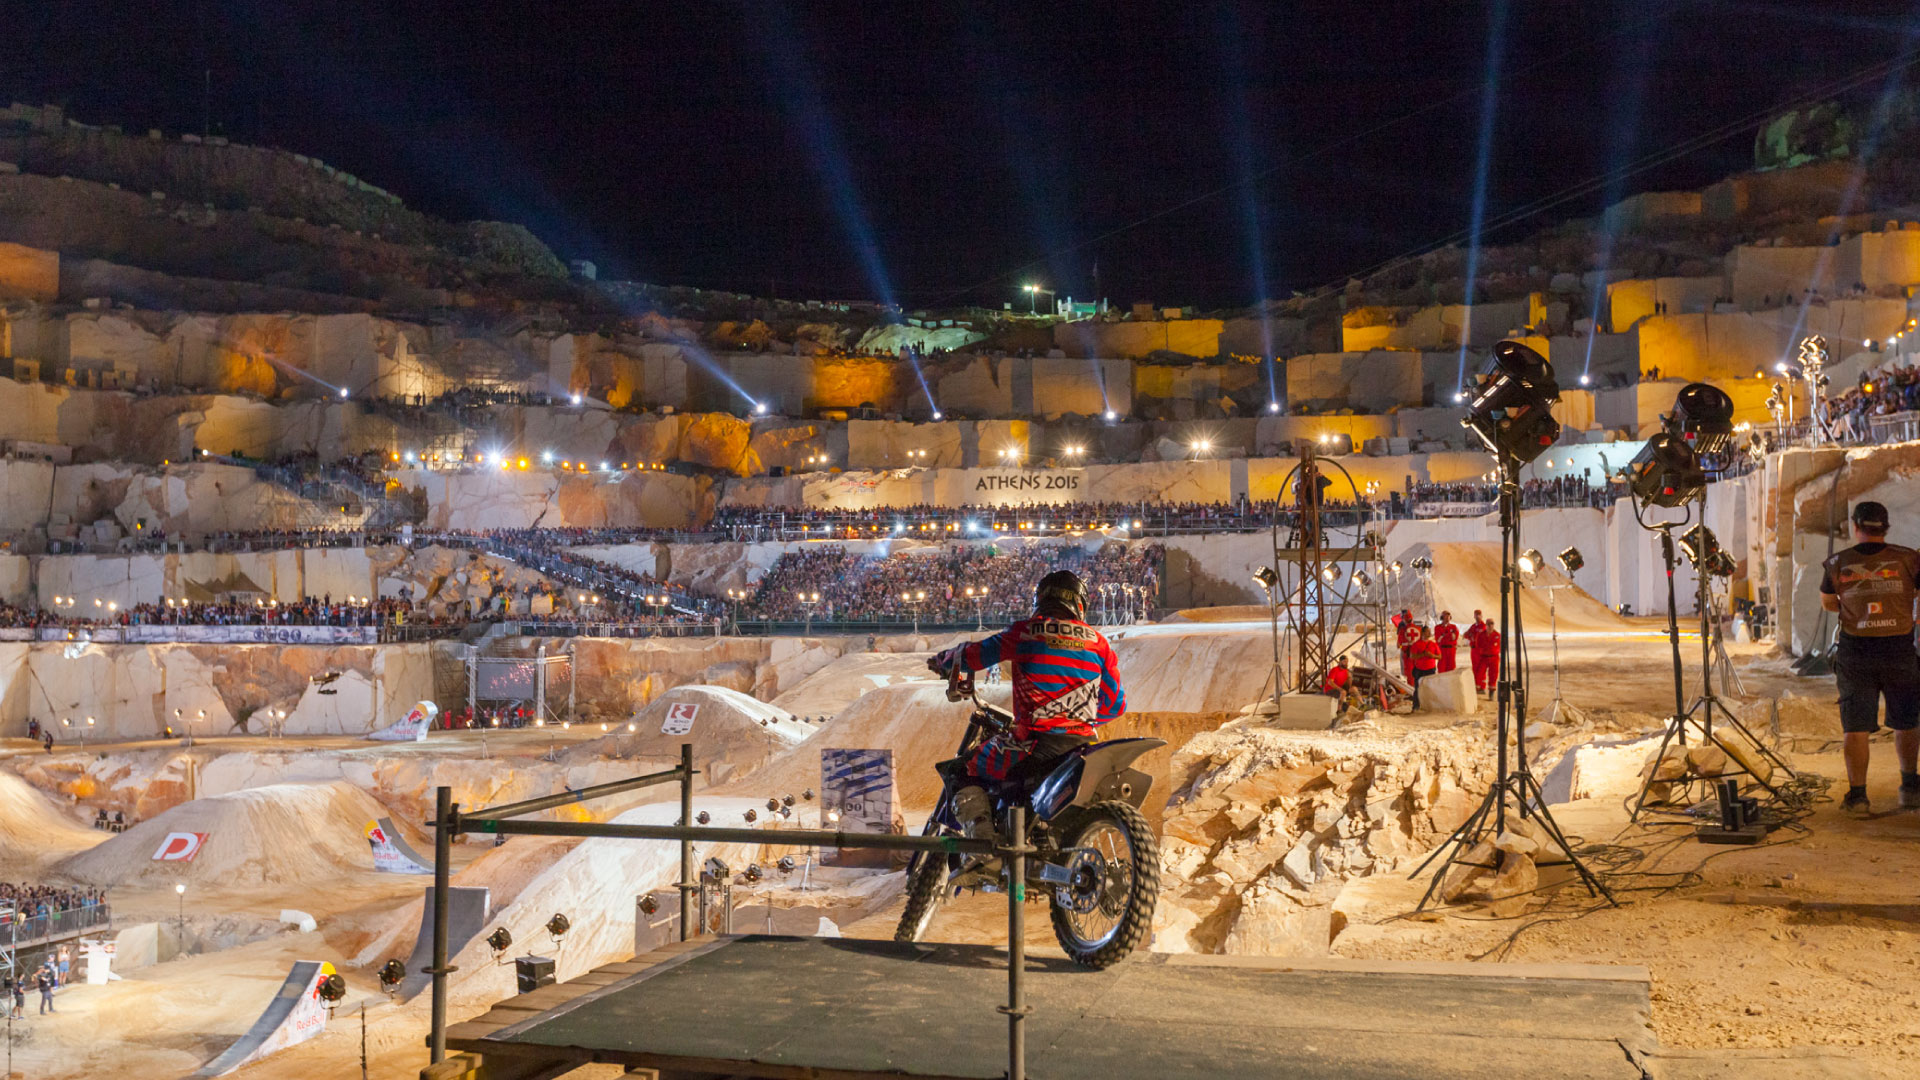 Red Bull XFighters Athen 2015.